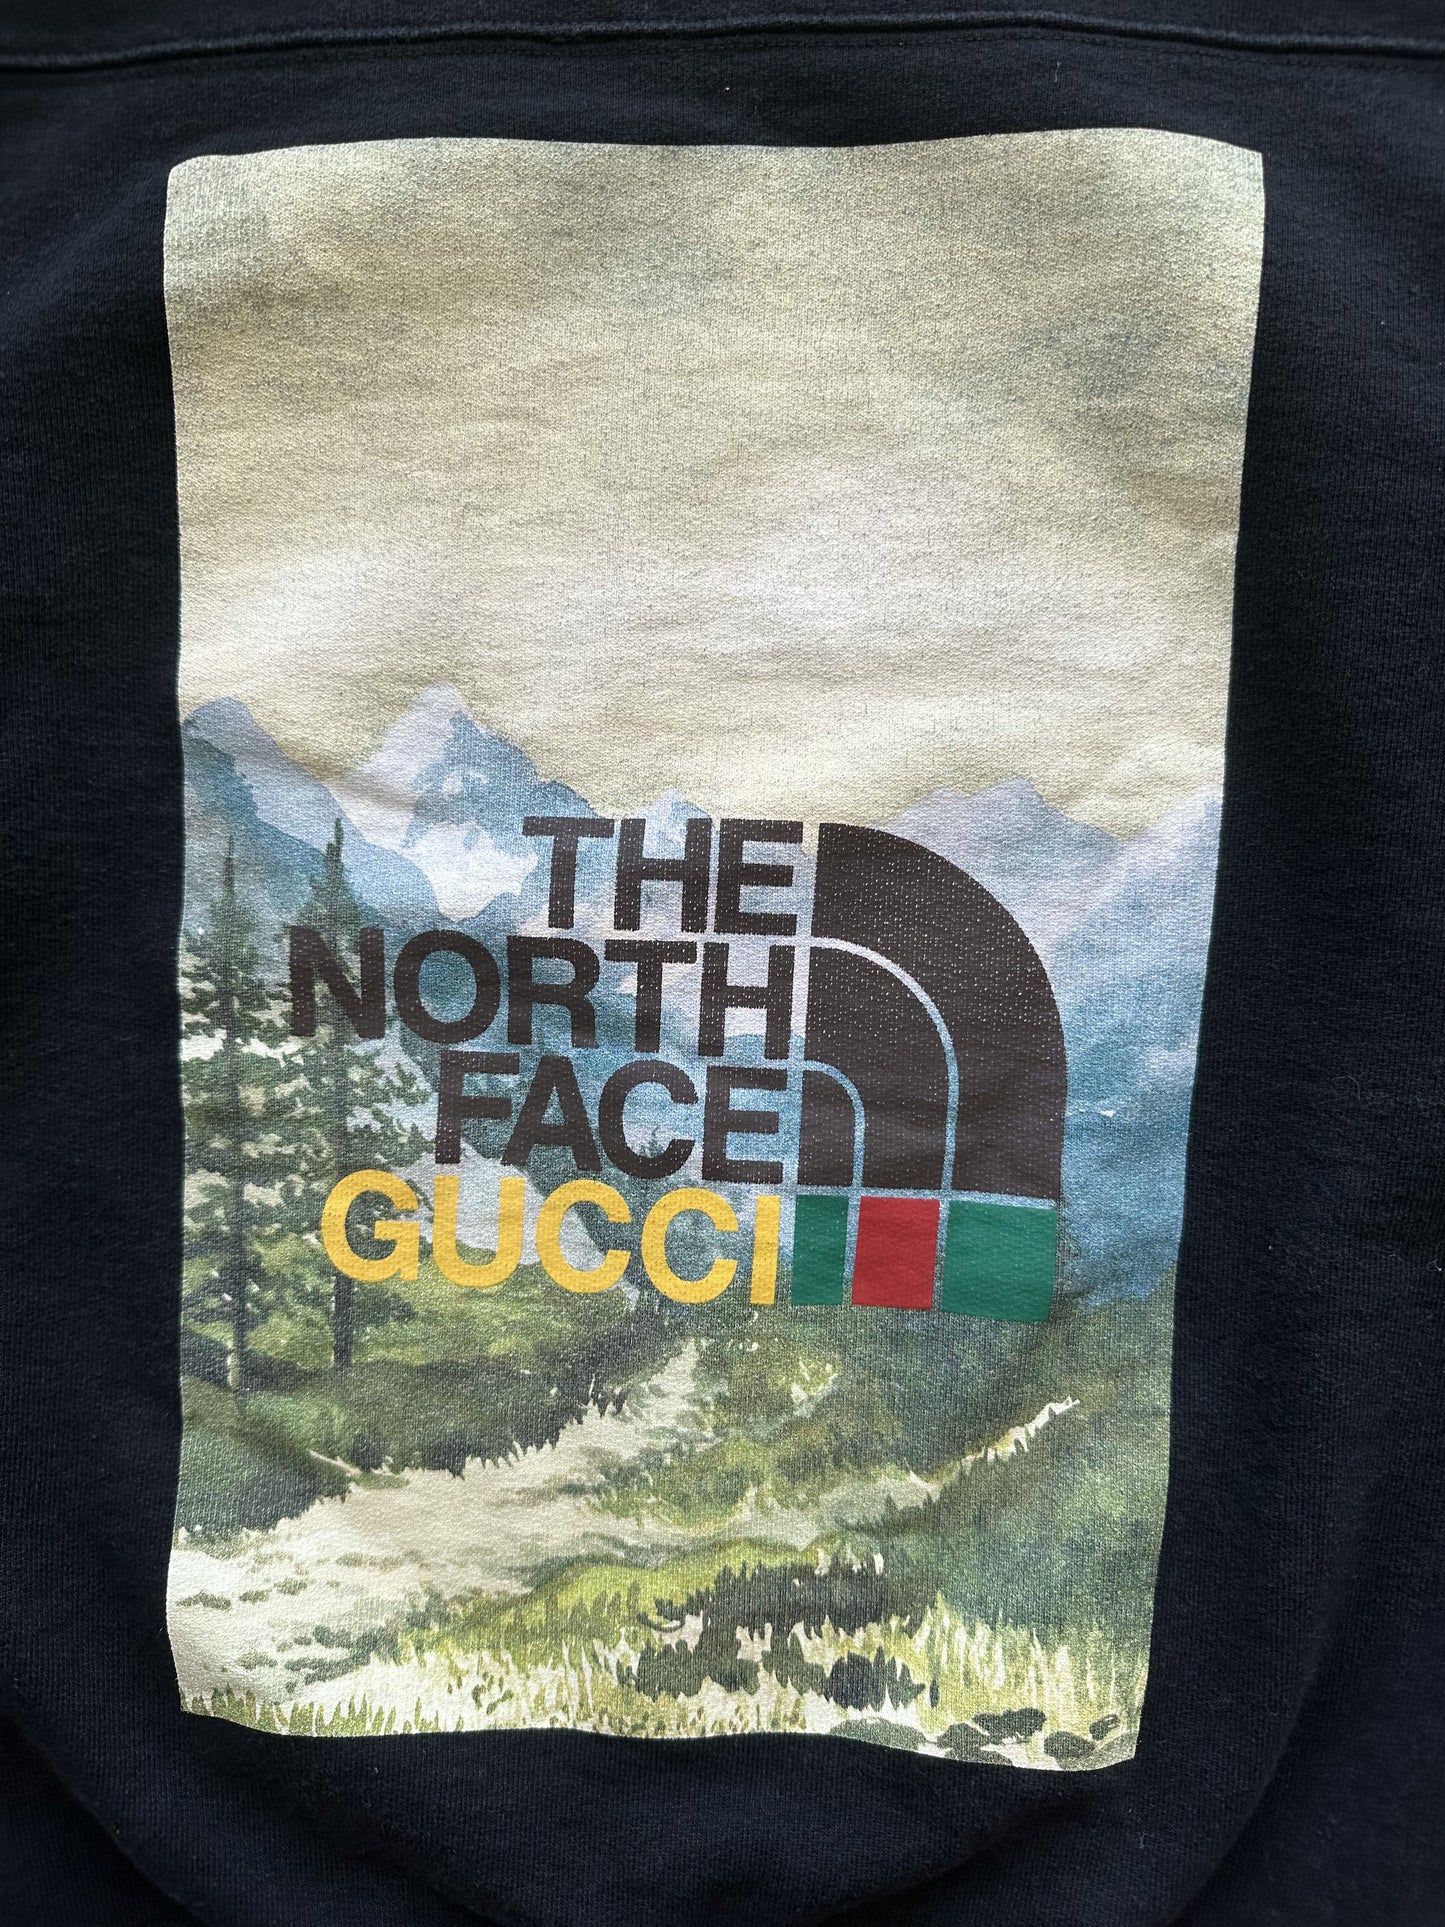 Gucci The North Face Logo Tee – Savonches